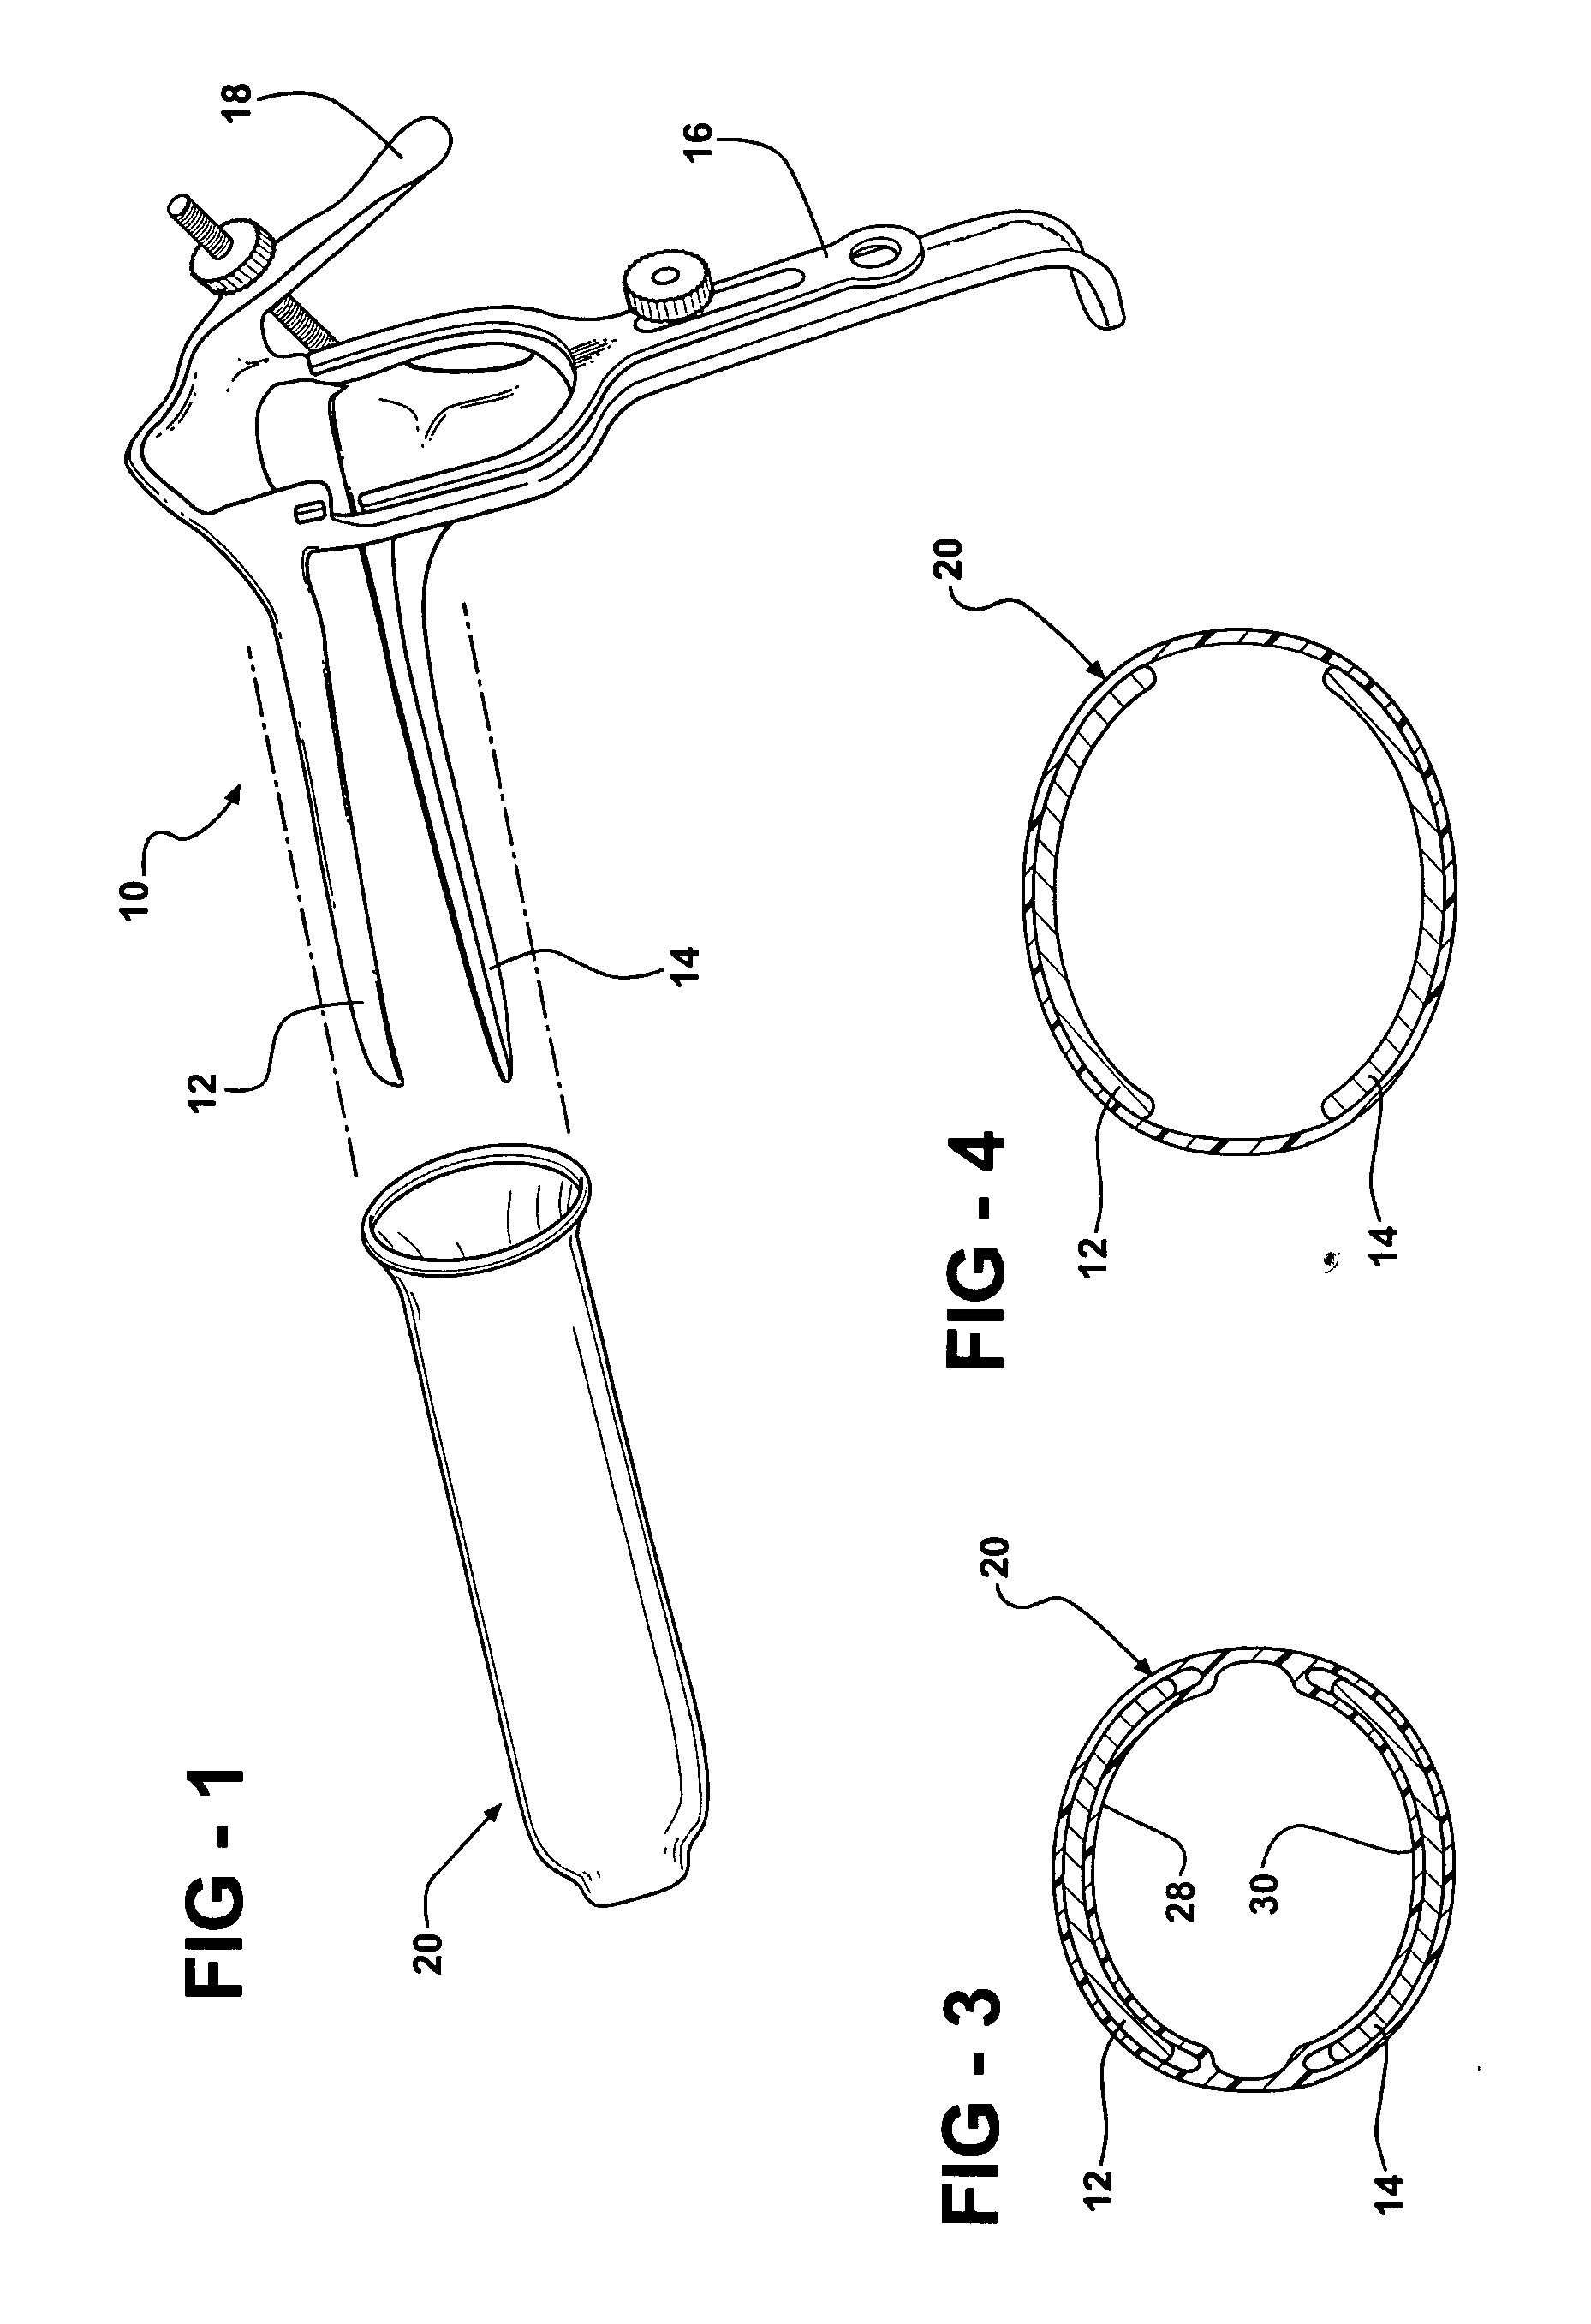 Disposable cover for a vaginal speculum